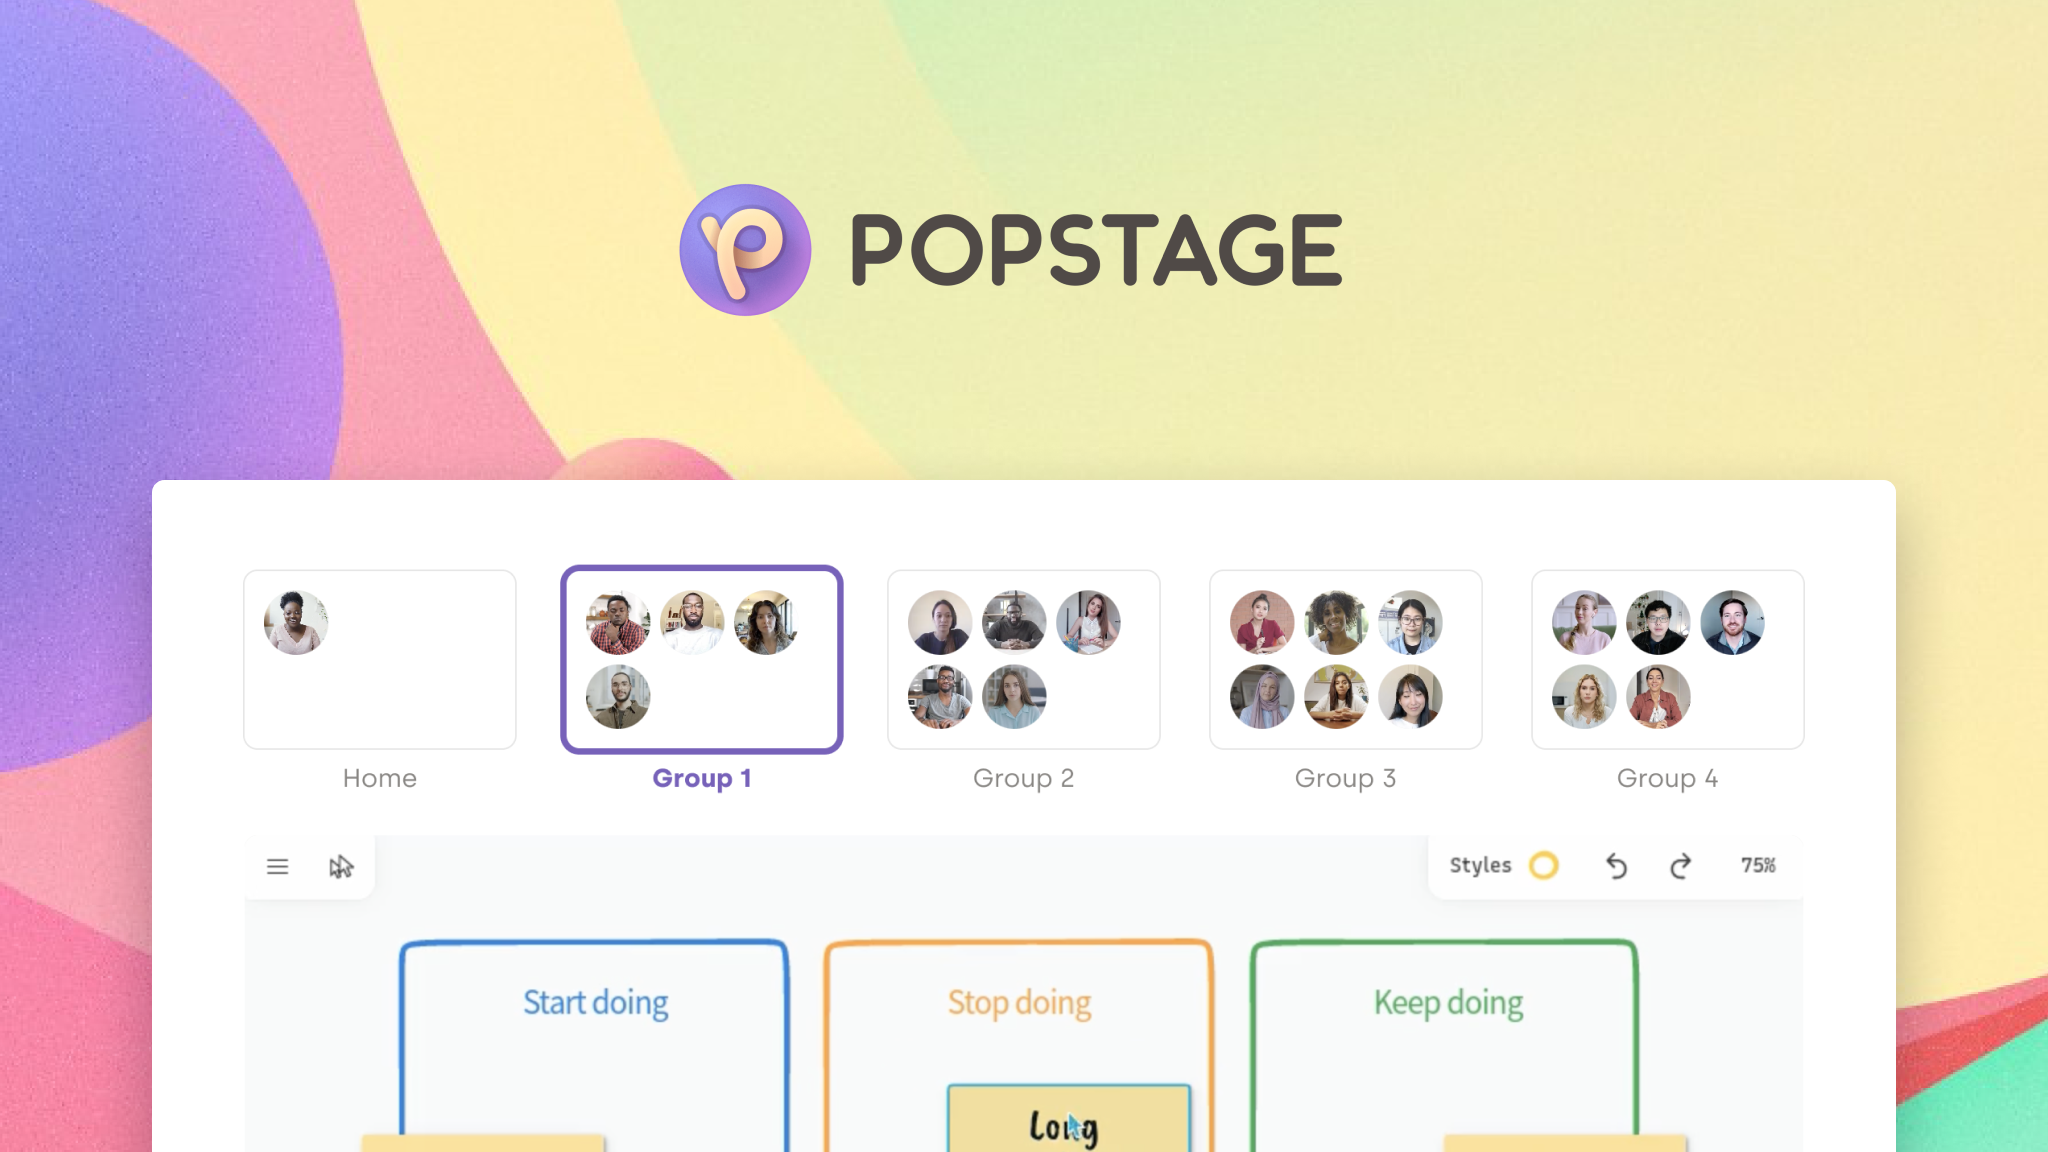 PopStage built all kinds of collaborative experiences with tailored permissions for their users using Liveblocks